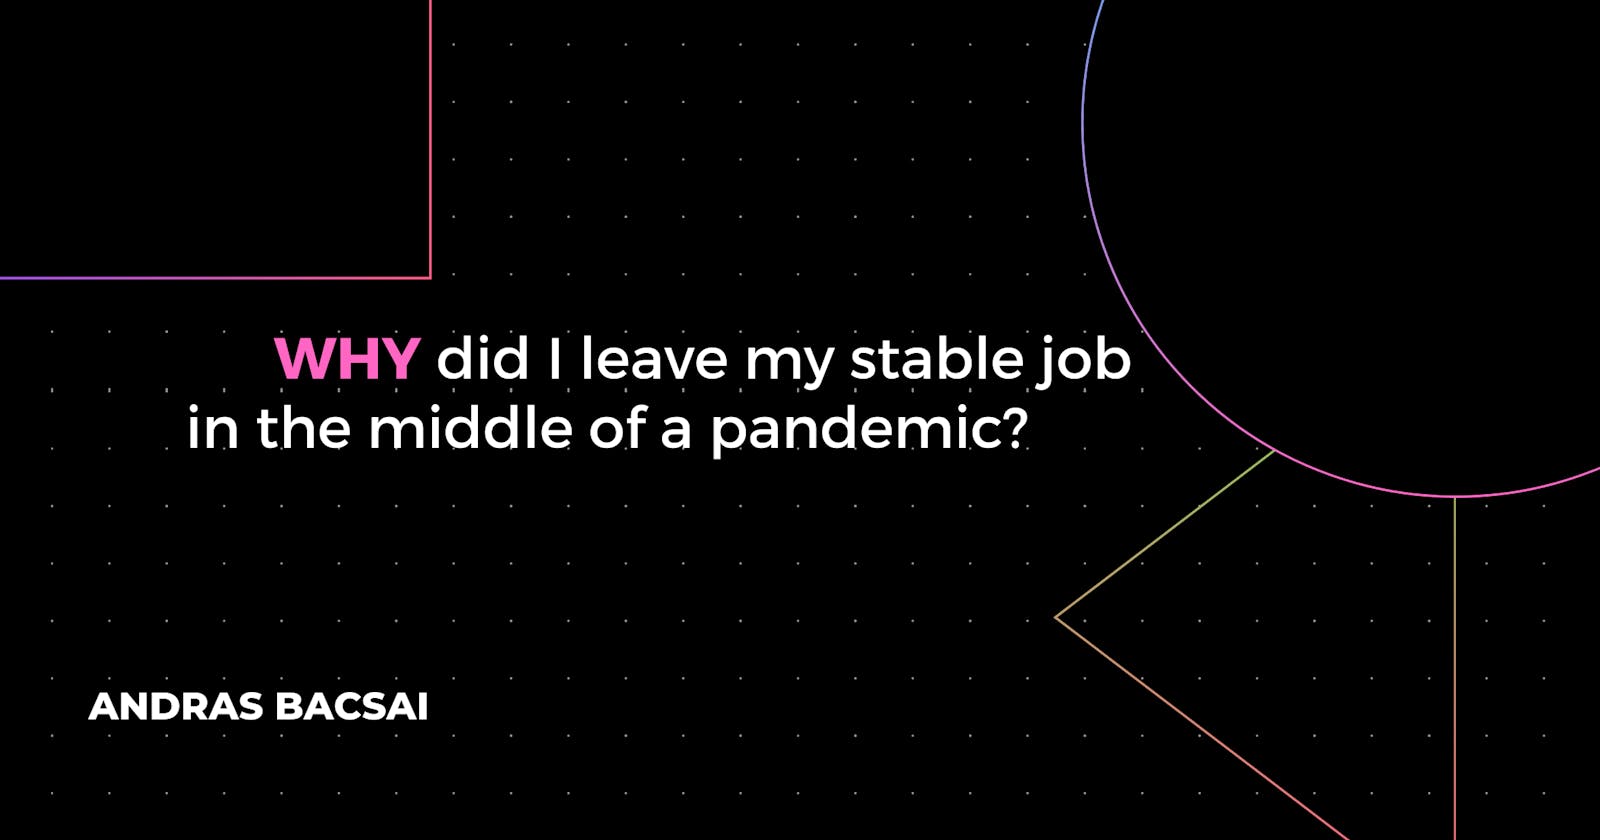 Why did I leave my stable job in the middle of a pandemic?